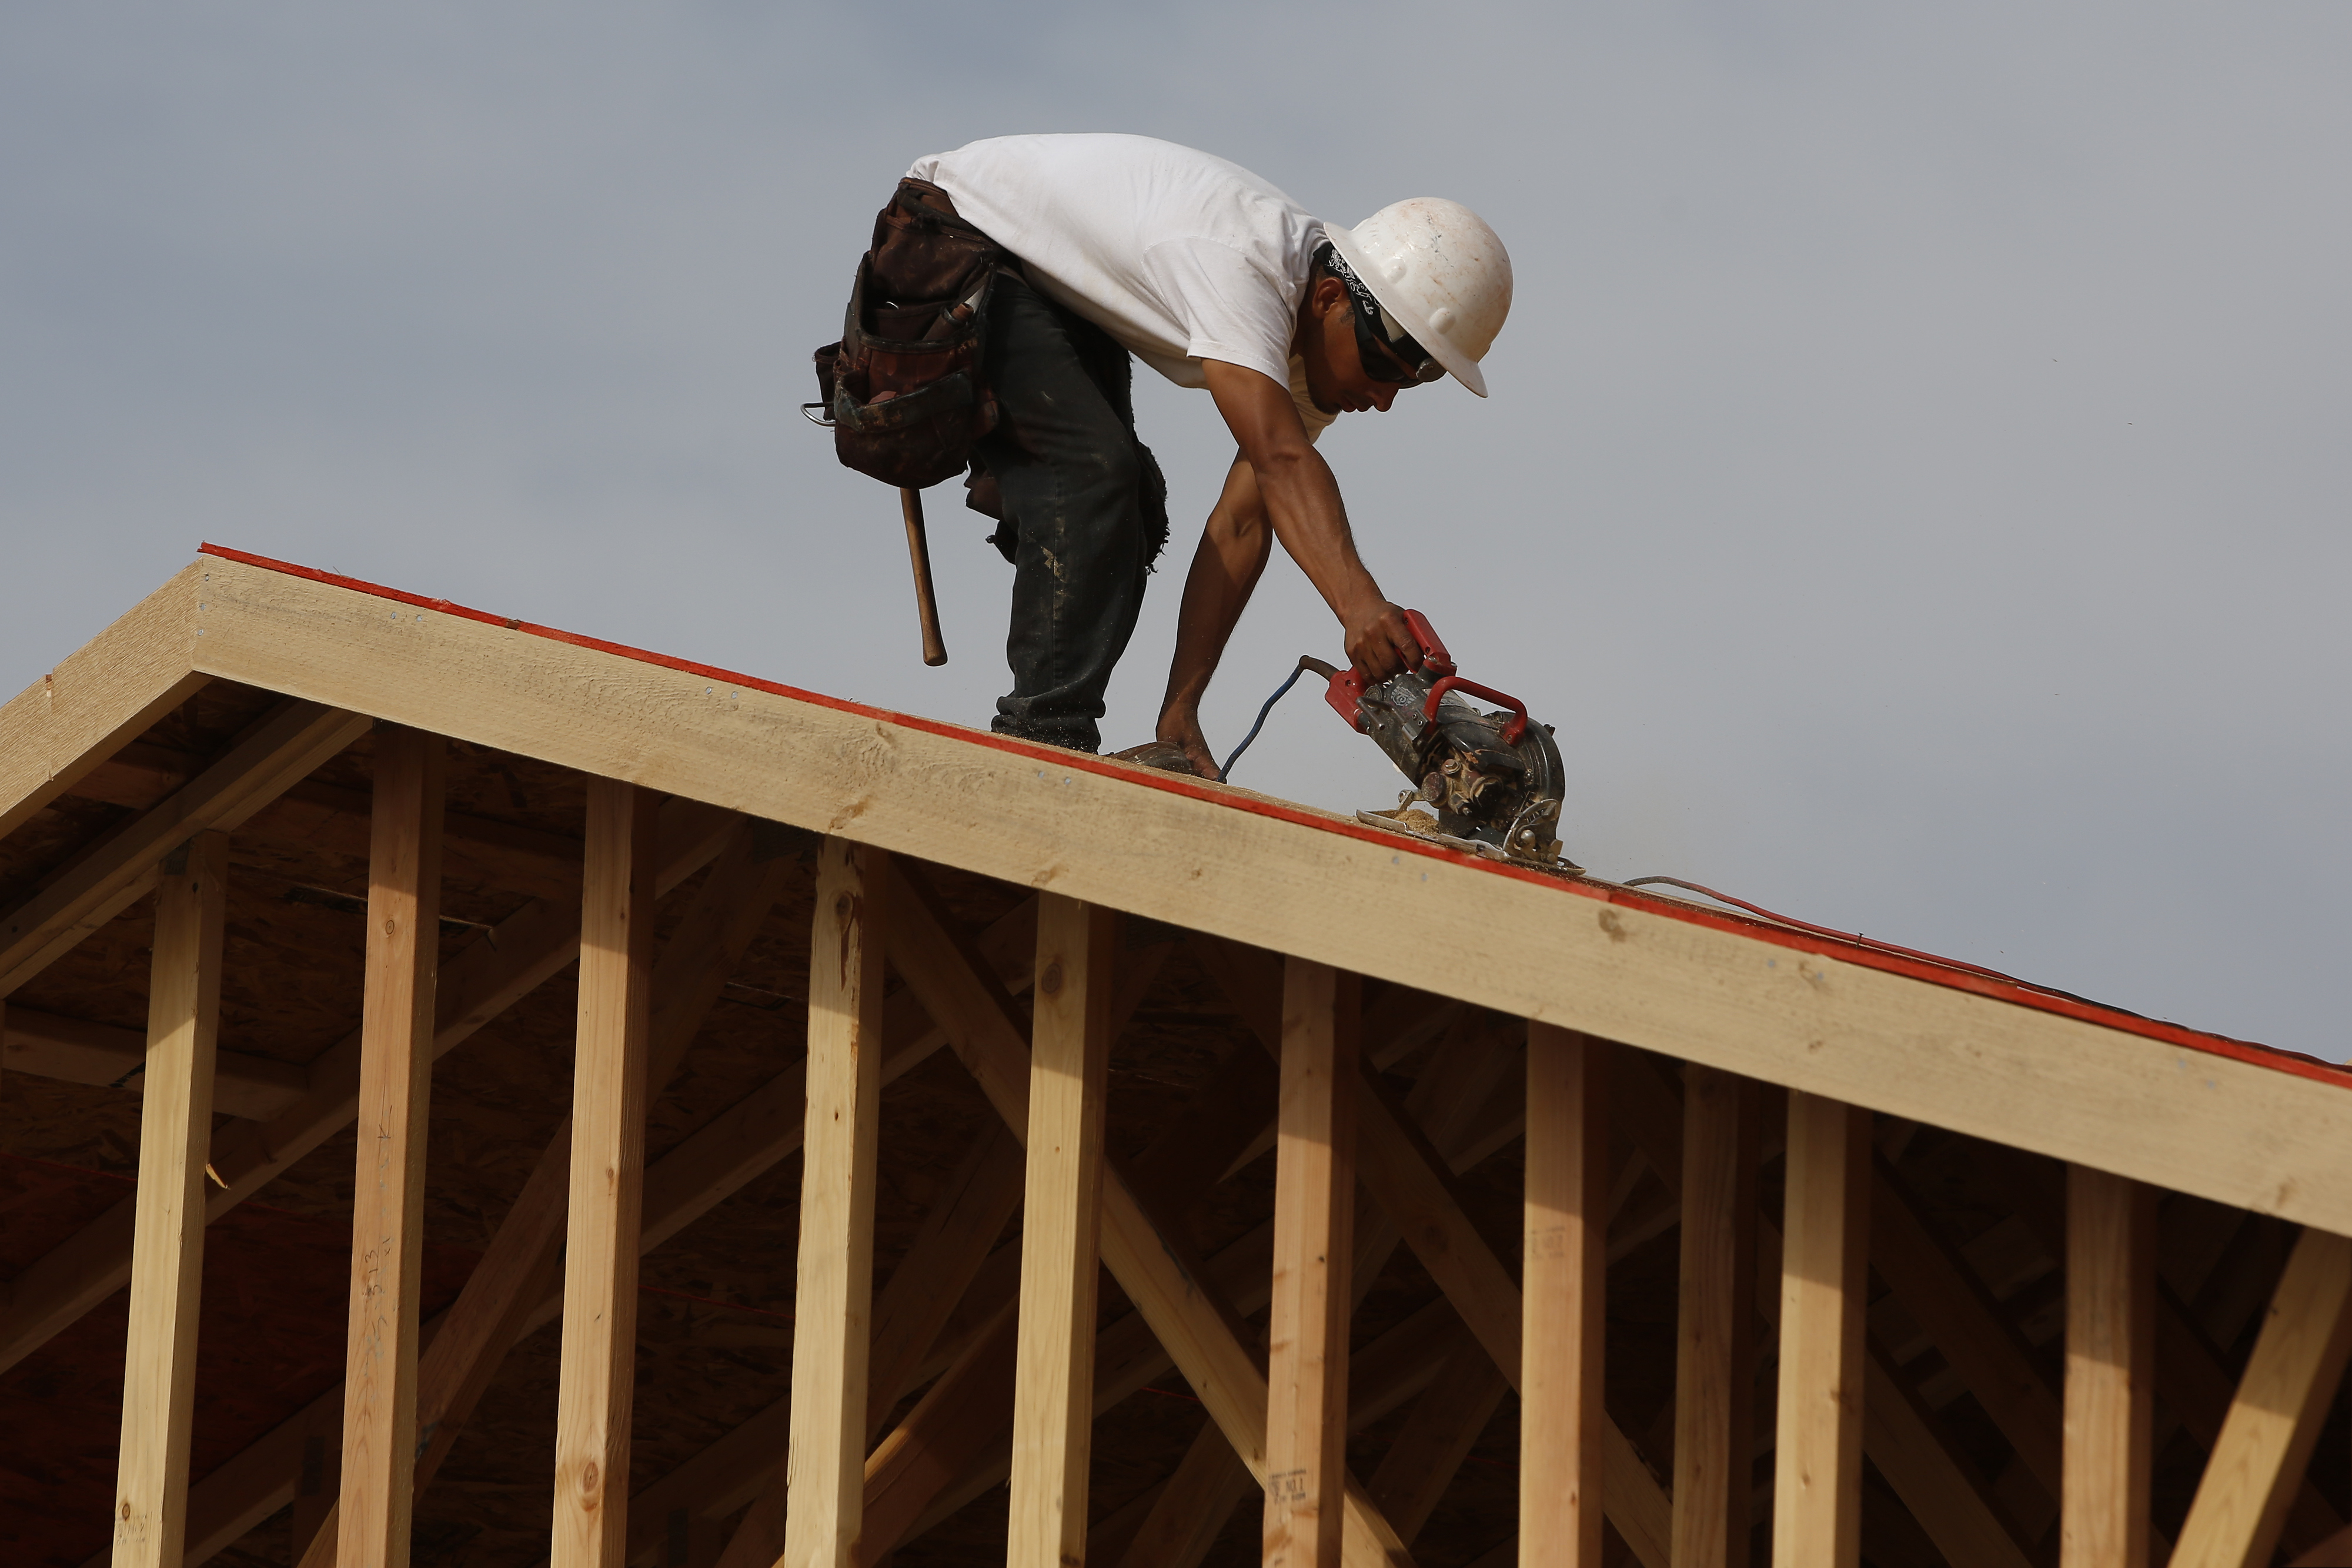 A worker builds a new Toll Brothers home. (Bloomberg&mdash;Bloomberg via Getty Images)